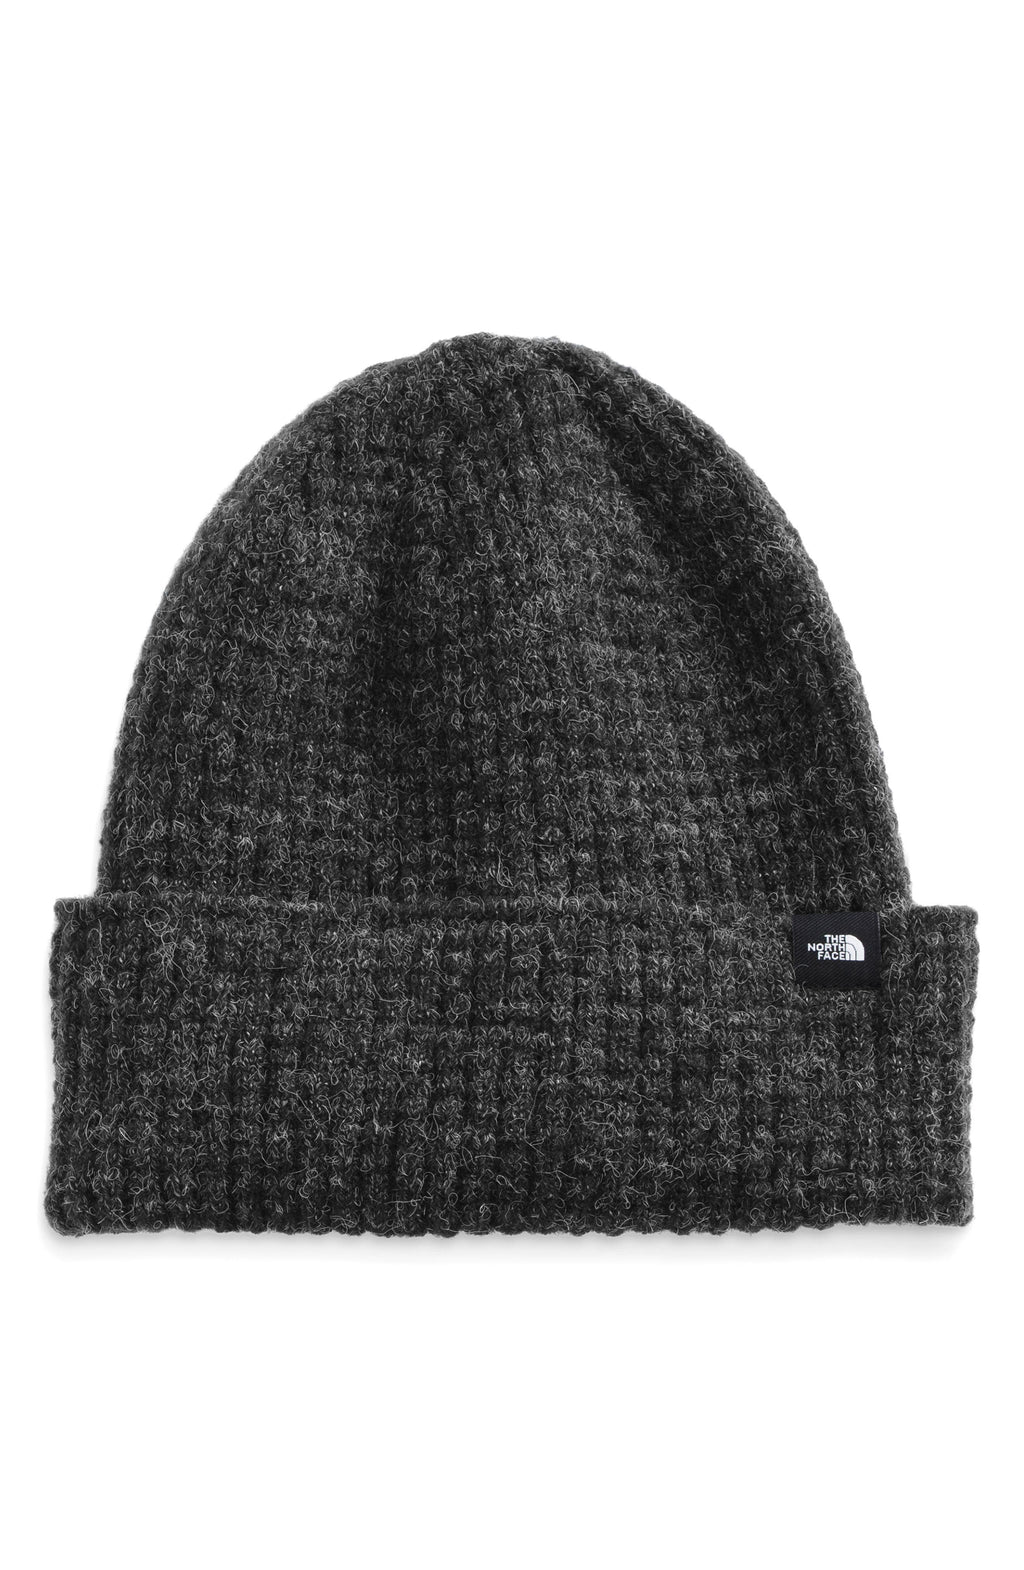 THE NORTH FACE Ribbed Knit Cuff Beanie, Main, color, TNFDARKGREYHTHR